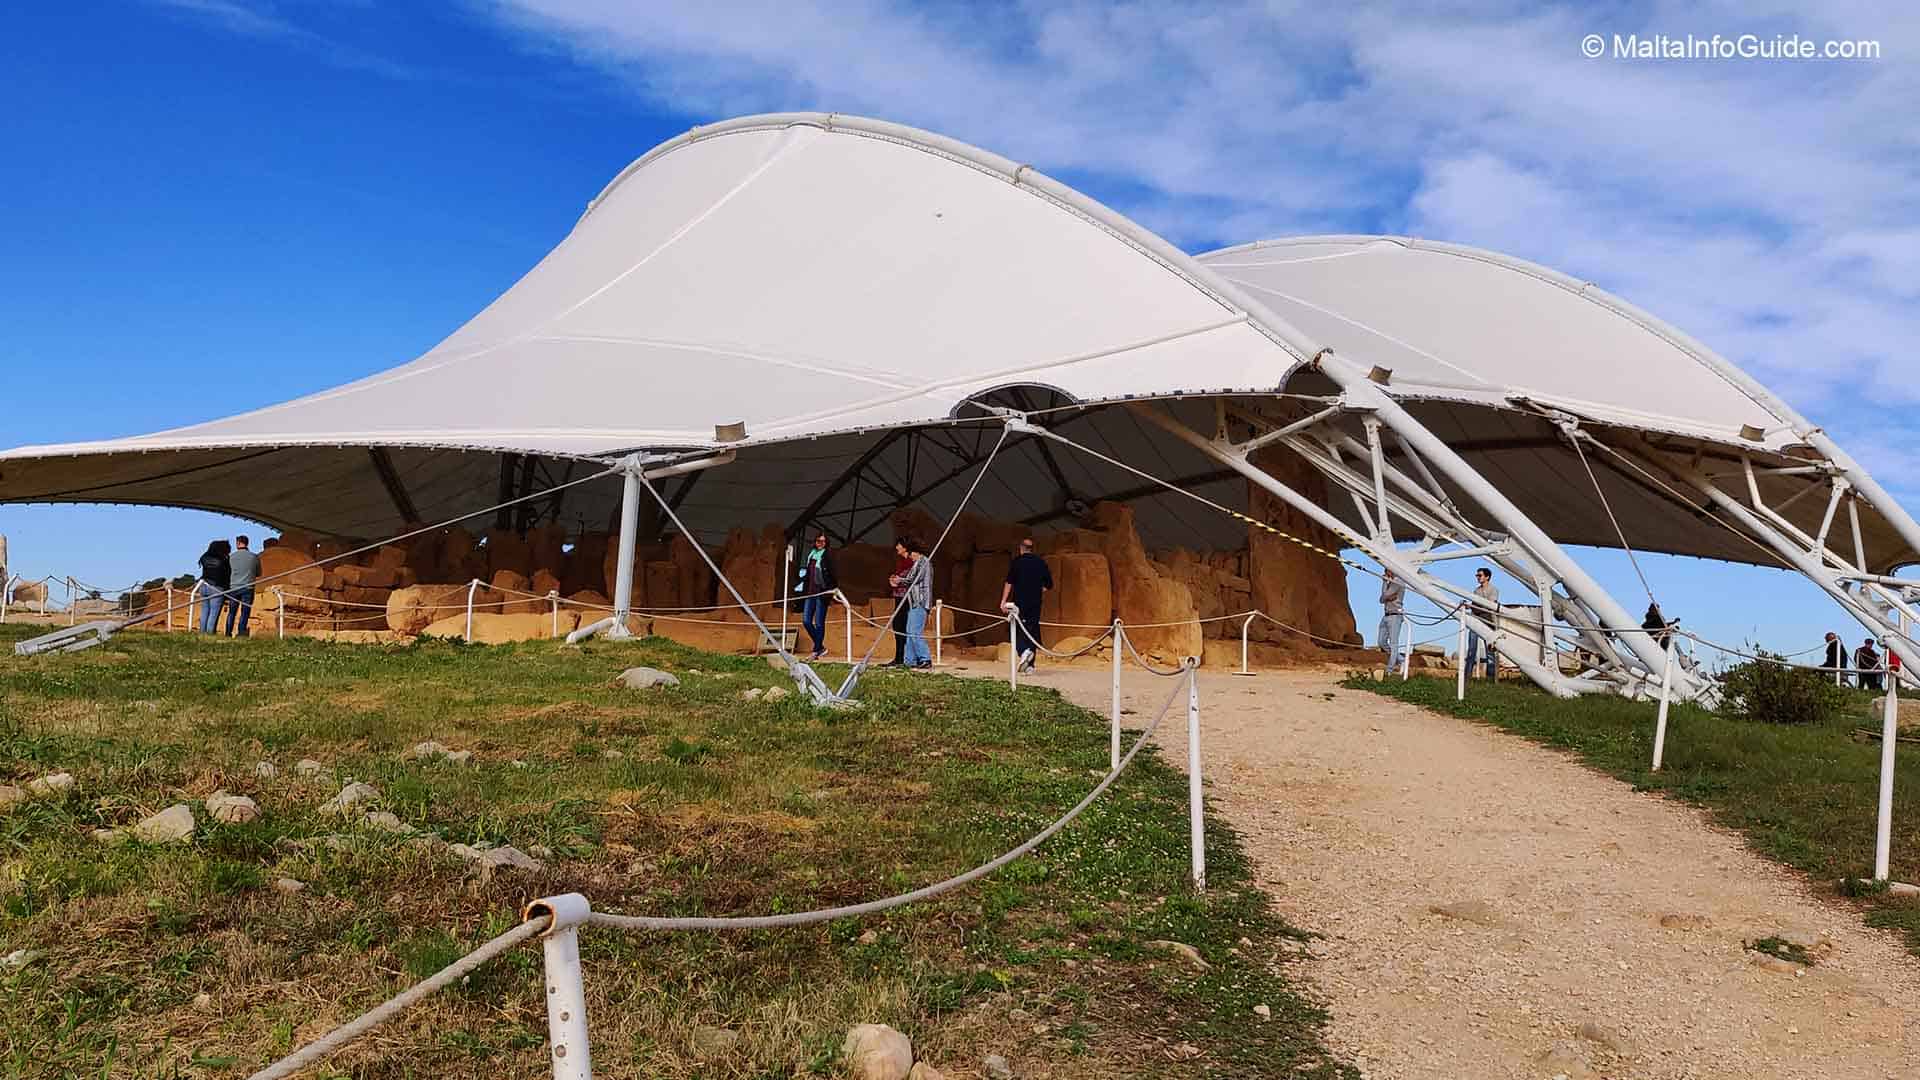 The whole temple covered in the tent.